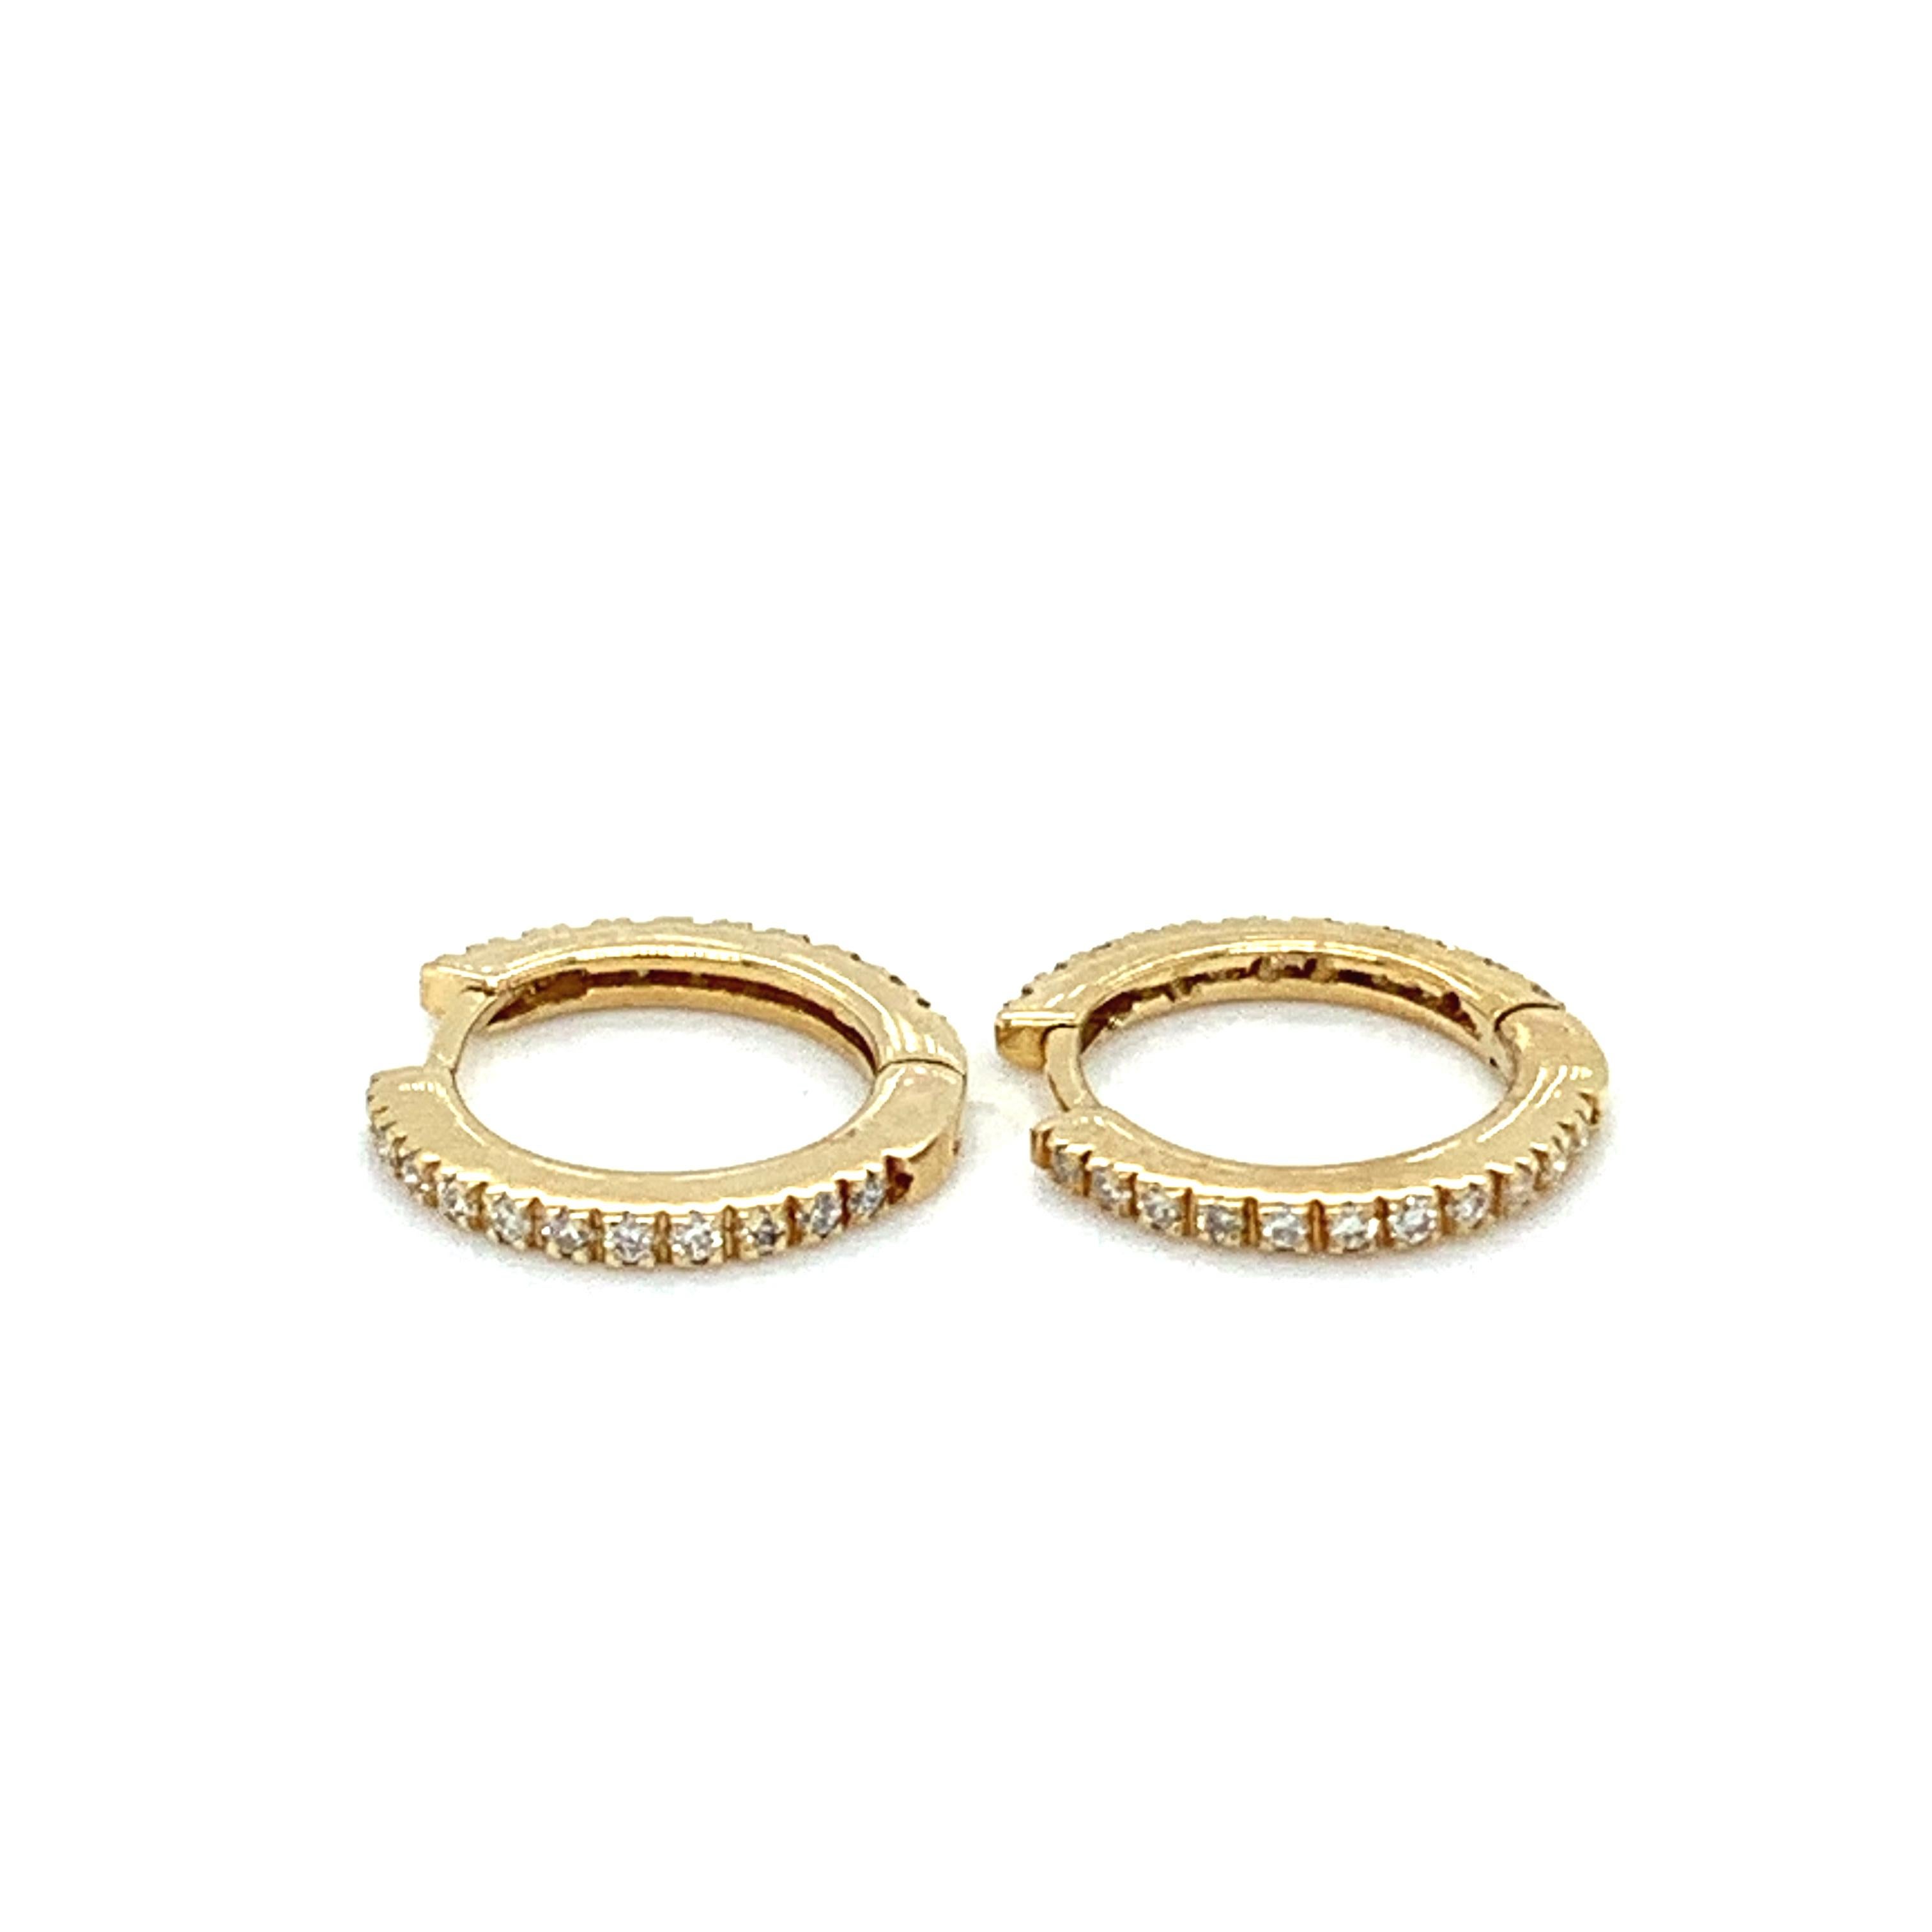 Round Cut Diamond hoop earrings small 18k yellow gold For Sale